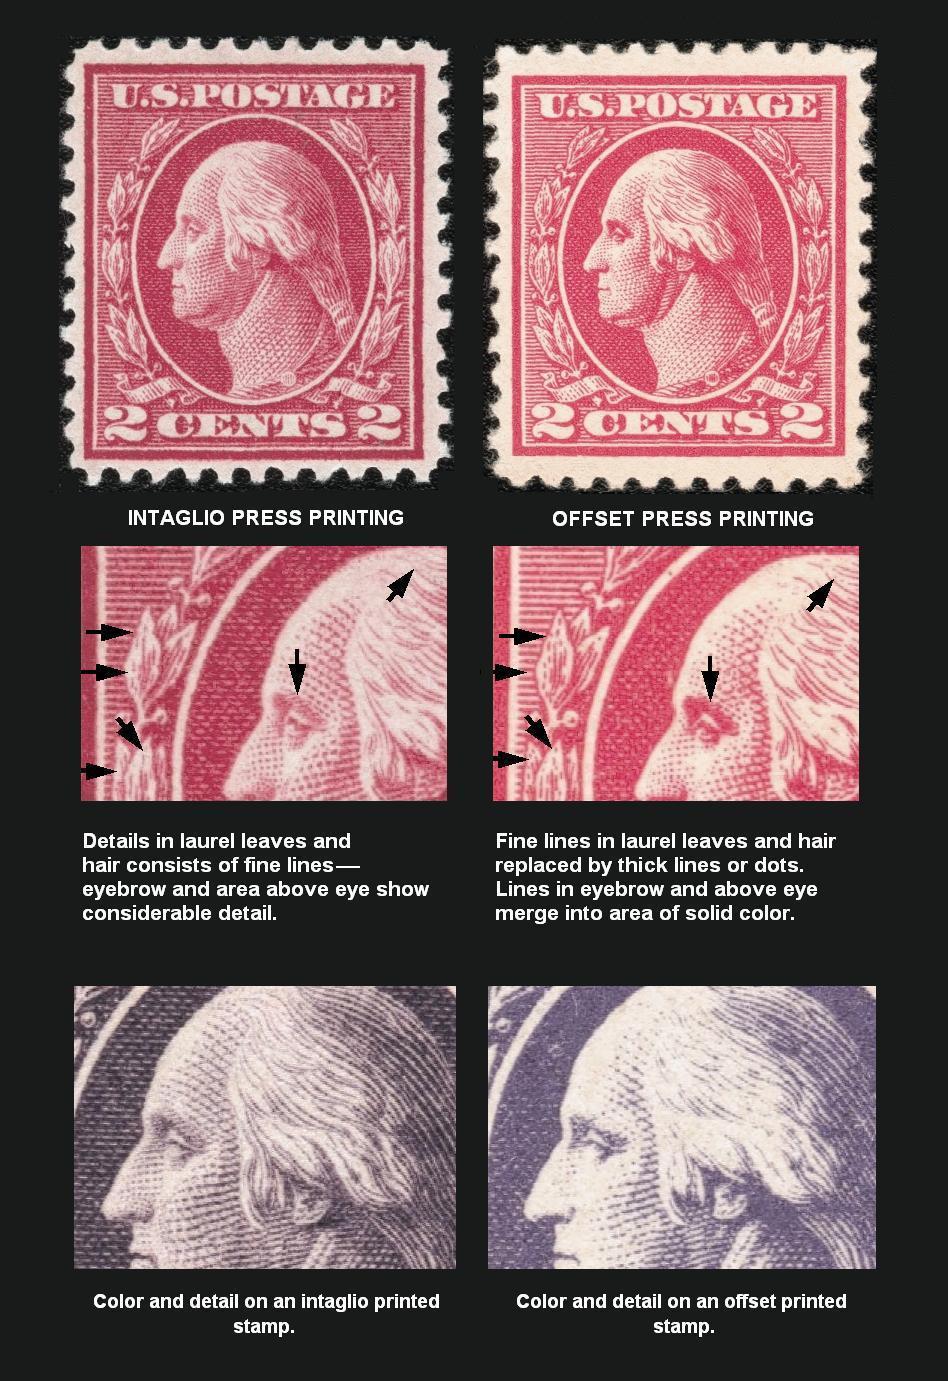 4 of 8 12/25/2014 4:19 PM Section 5: Bluish paper For a short period in 1909, some US stamps were